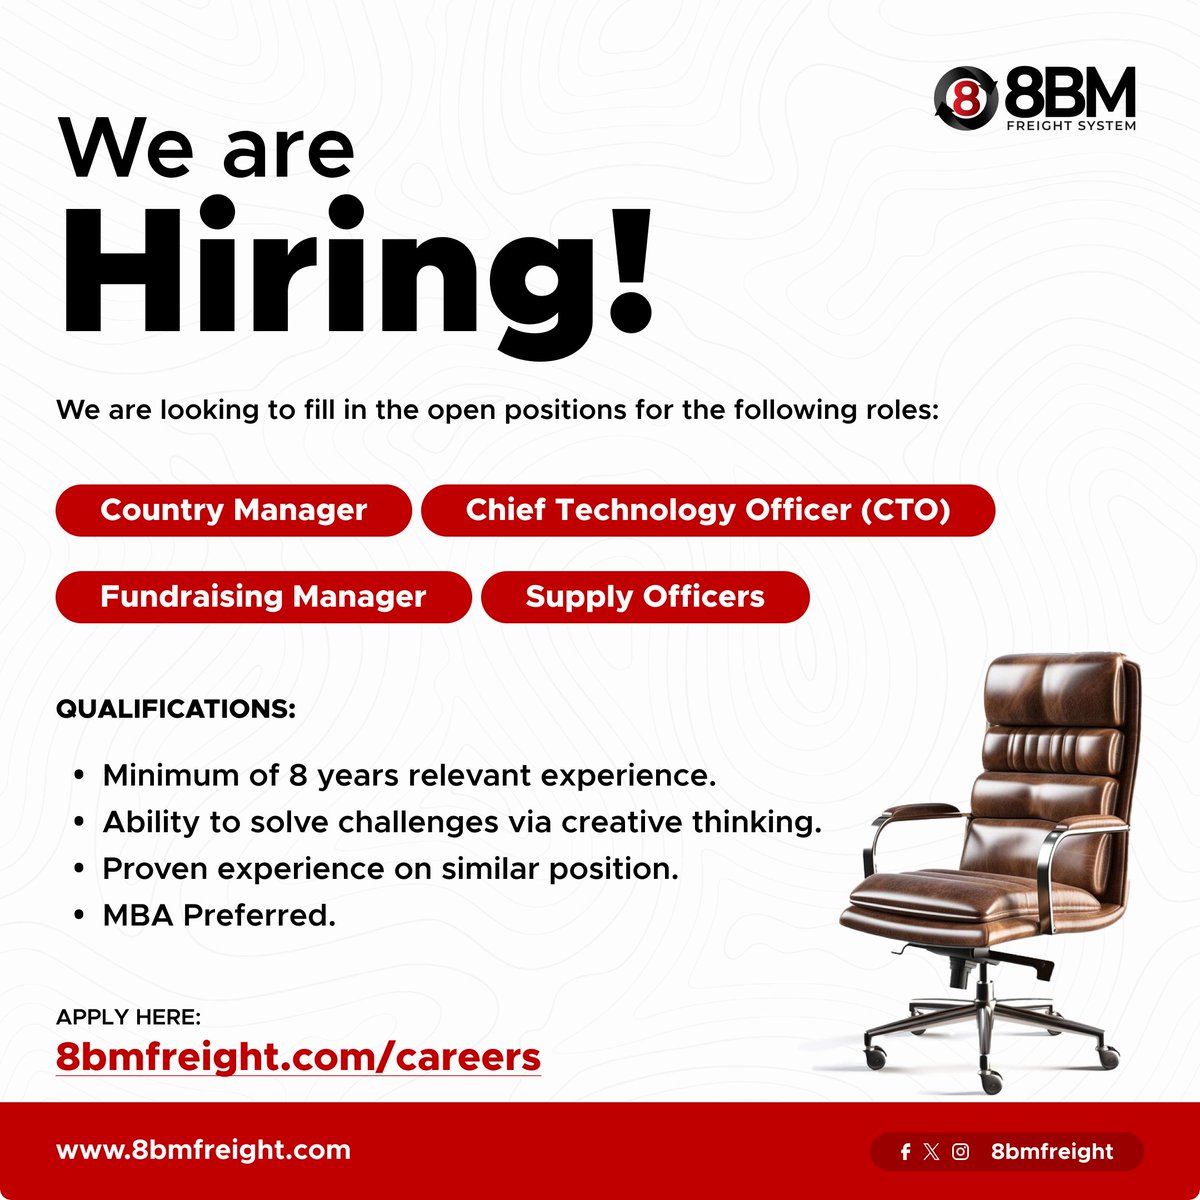 Are you passionate and determined to make a difference? If so, we want you!

Apply for openings via this link: 8bmfreight.com/careers

#Logistics #SupplyChain #JobsinNigeria #jobpost #jobsearch #Remote #Hybrid #jobopenings #CountryManager #FundraisingManager #CTO #SupplyOfficer